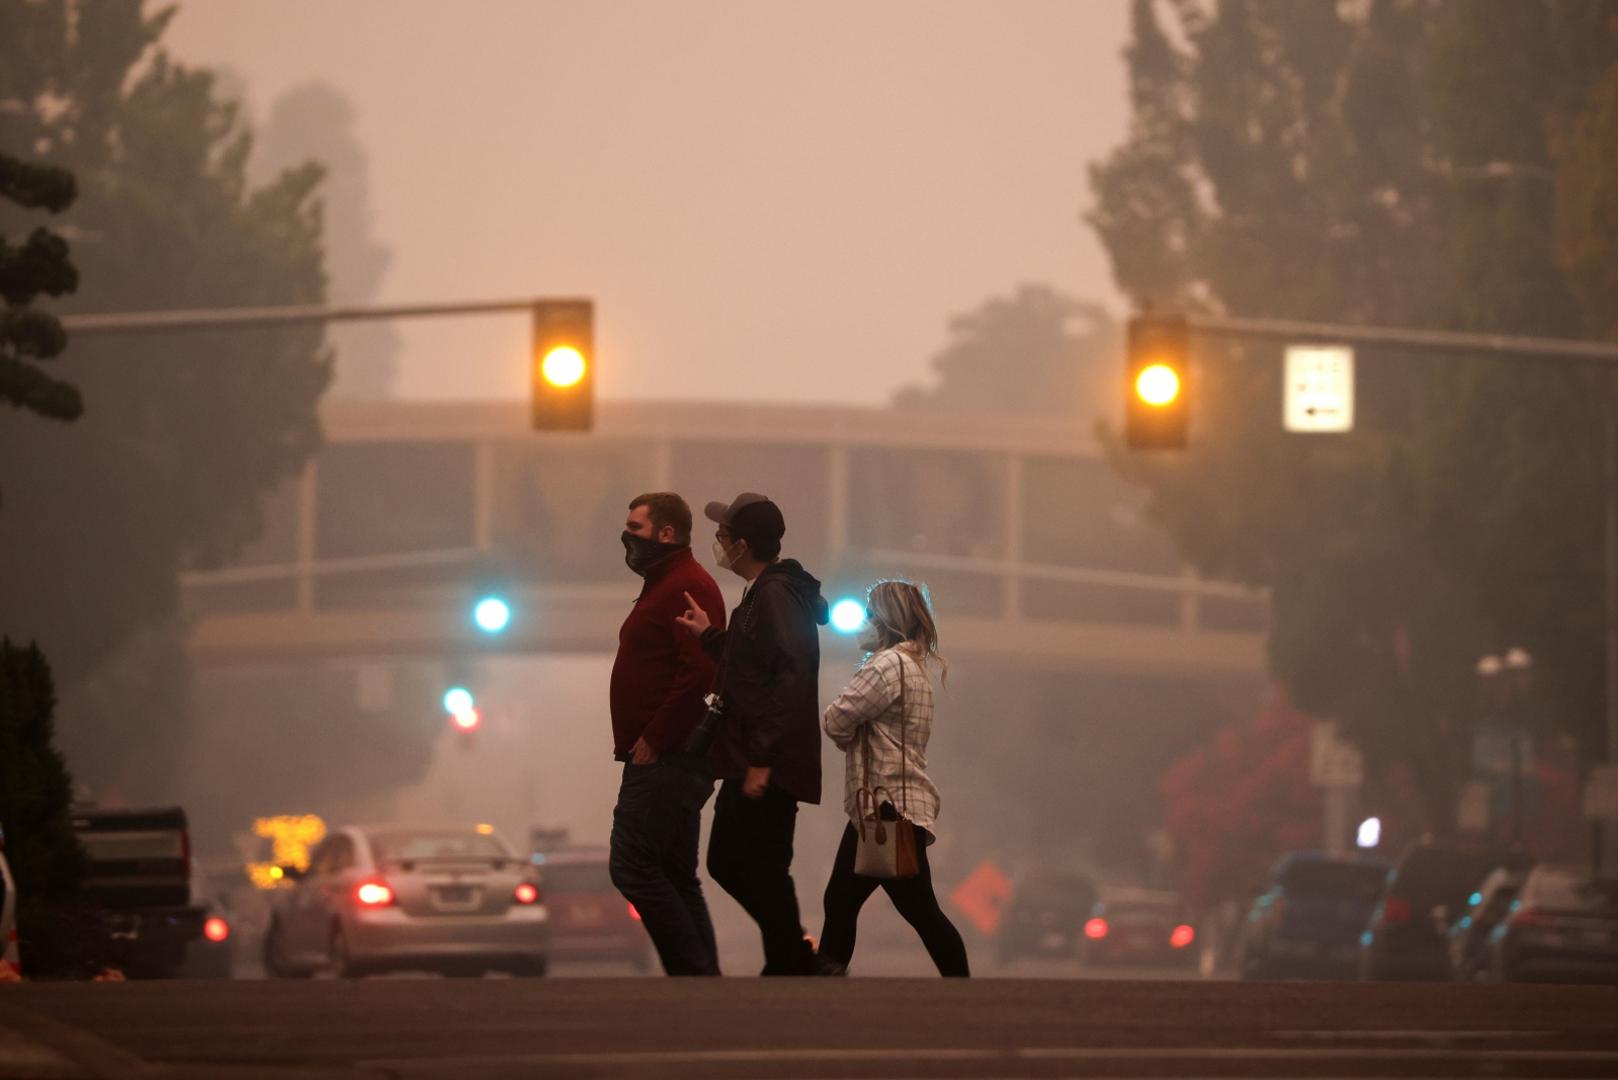 Local residents cross a street as smoke from wildfires covers an area near Salem, Oregon Local residents cross a street as smoke from wildfires covers an area near Salem, Oregon, U.S., September 10, 2020. REUTERS/Carlos Barria CARLOS BARRIA